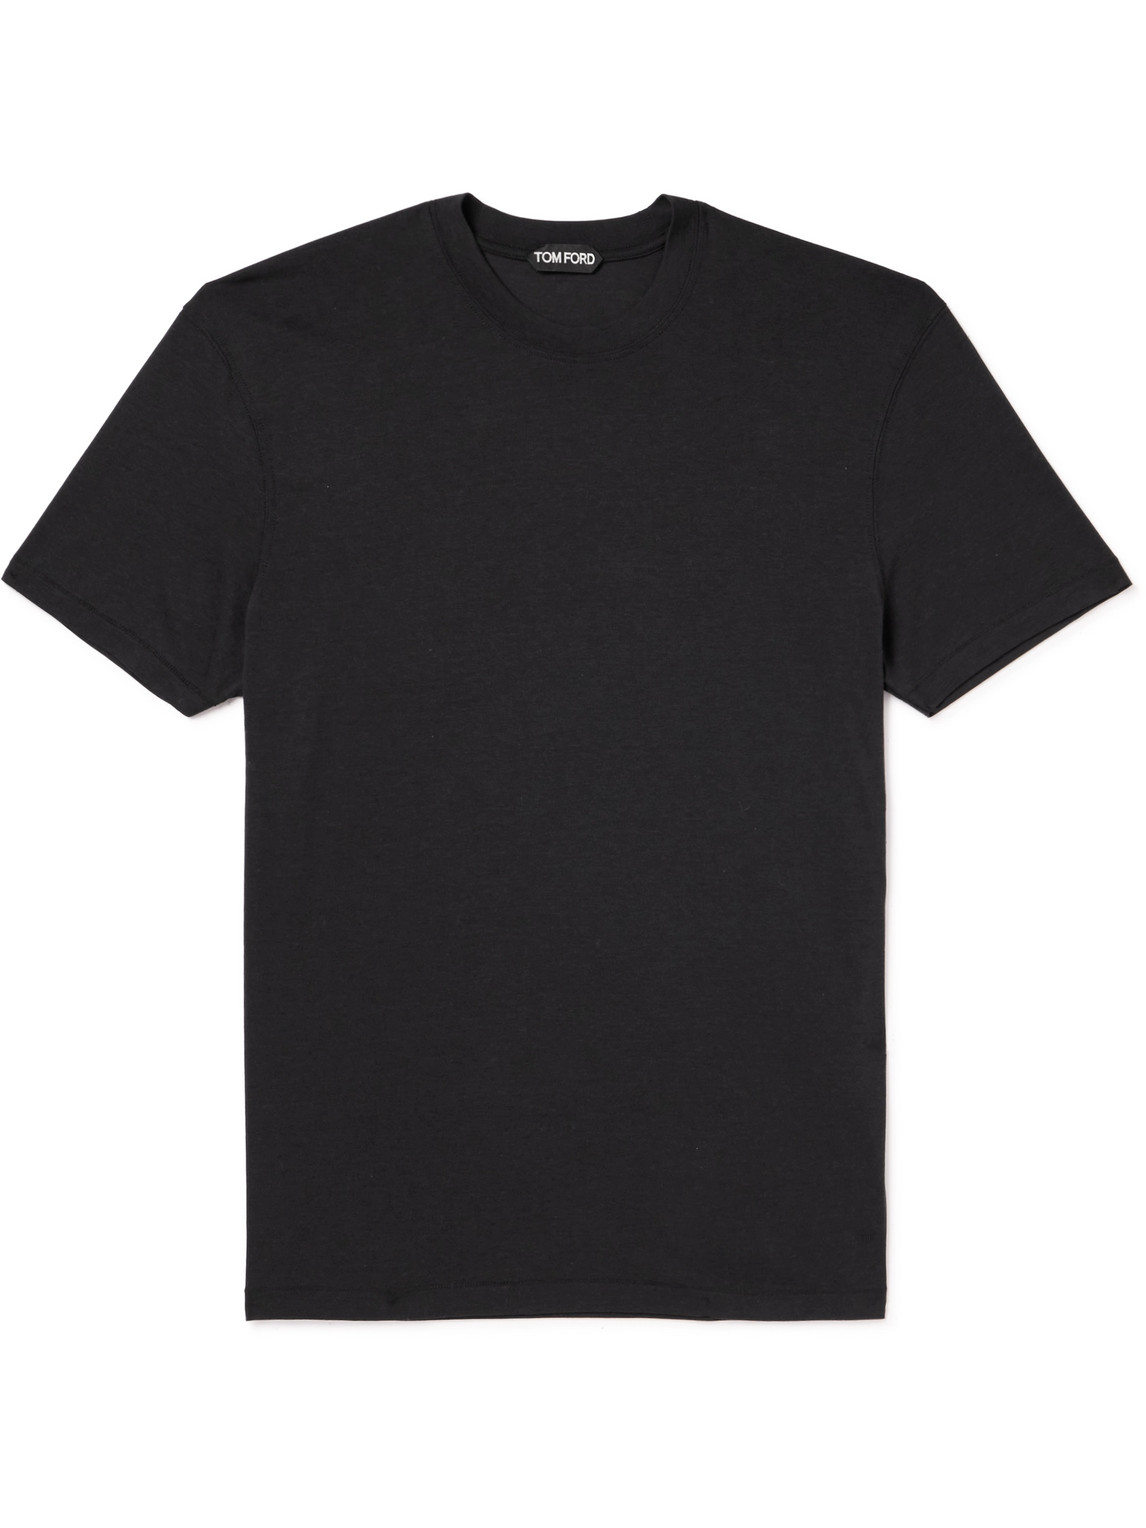 TOM FORD - Logo-Embroidered Lyocell and Cotton-Blend Jersey T-Shirt - Men - Black - IT 58 von TOM FORD